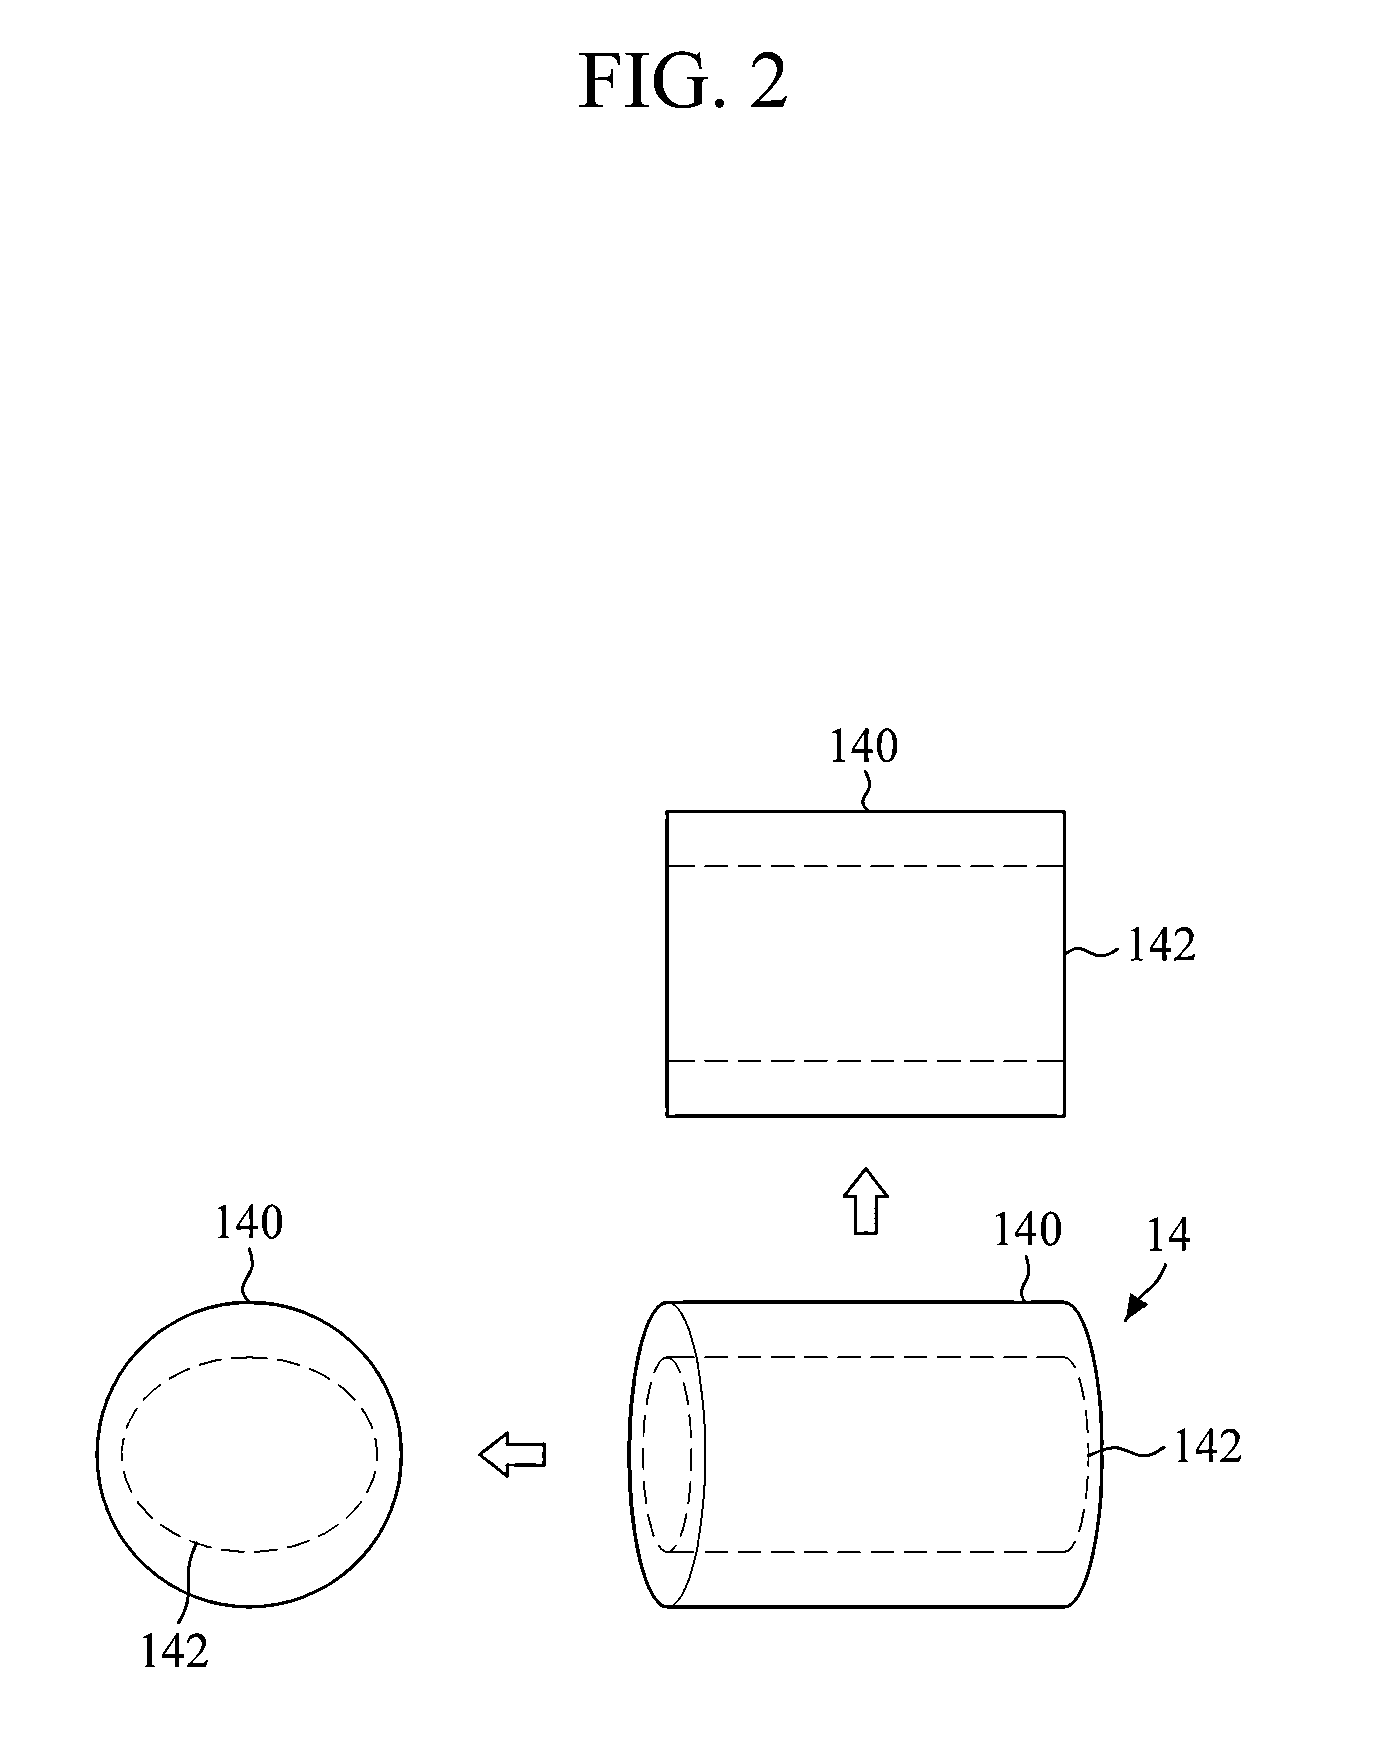 X-ray distribution adjusting filter, CT apparatus and method thereof